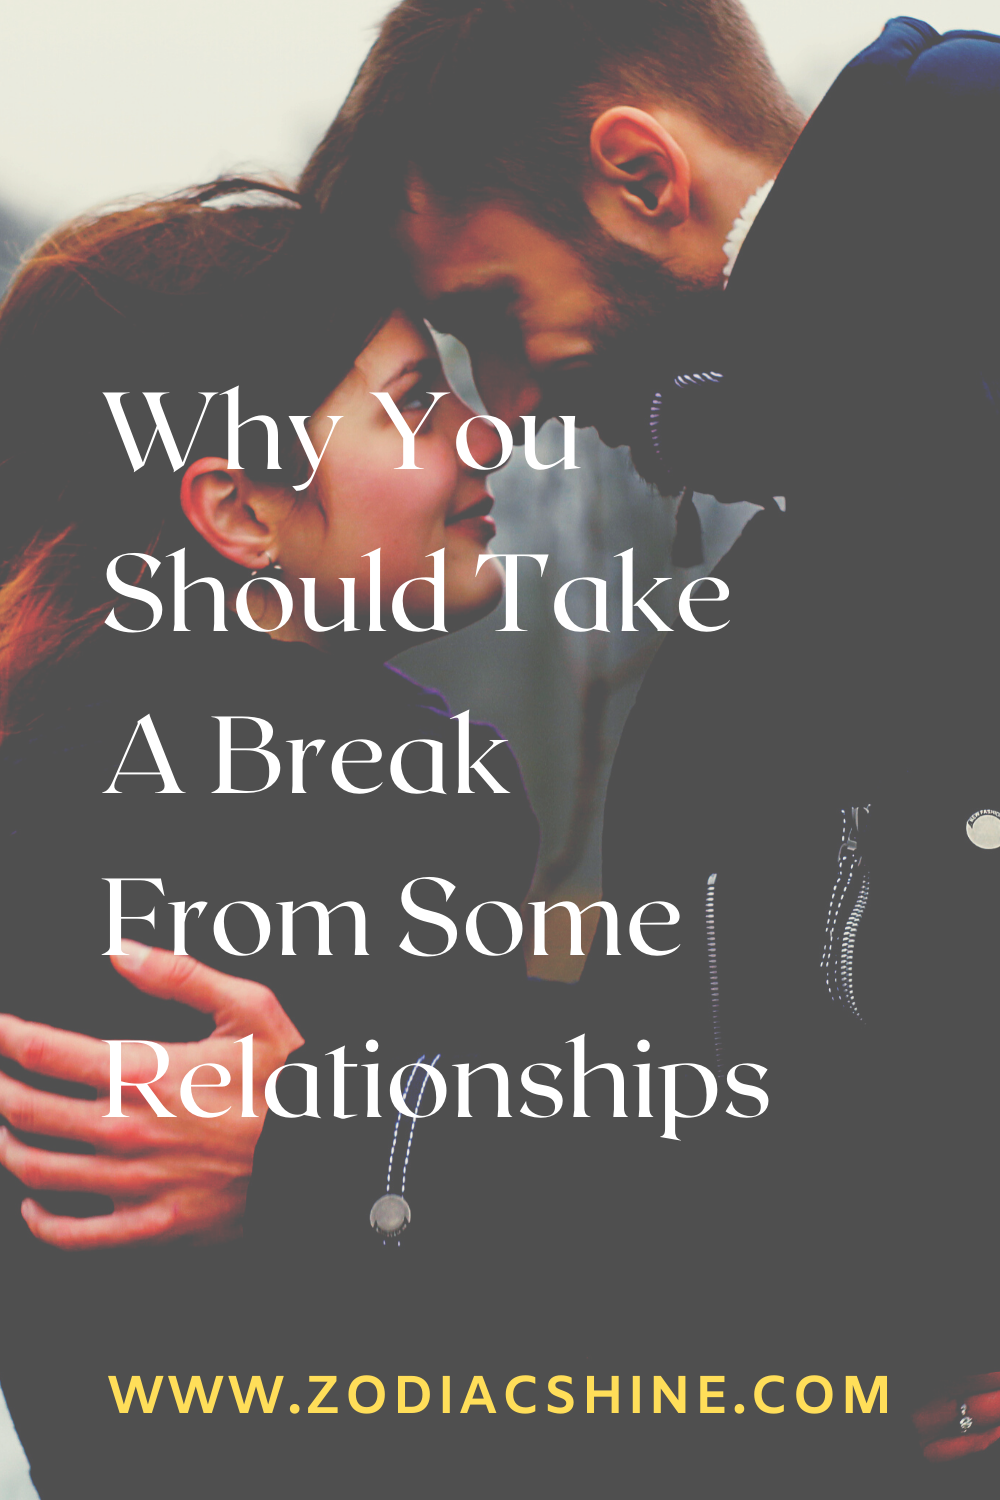 Why You Should Take A Break From Some Relationships